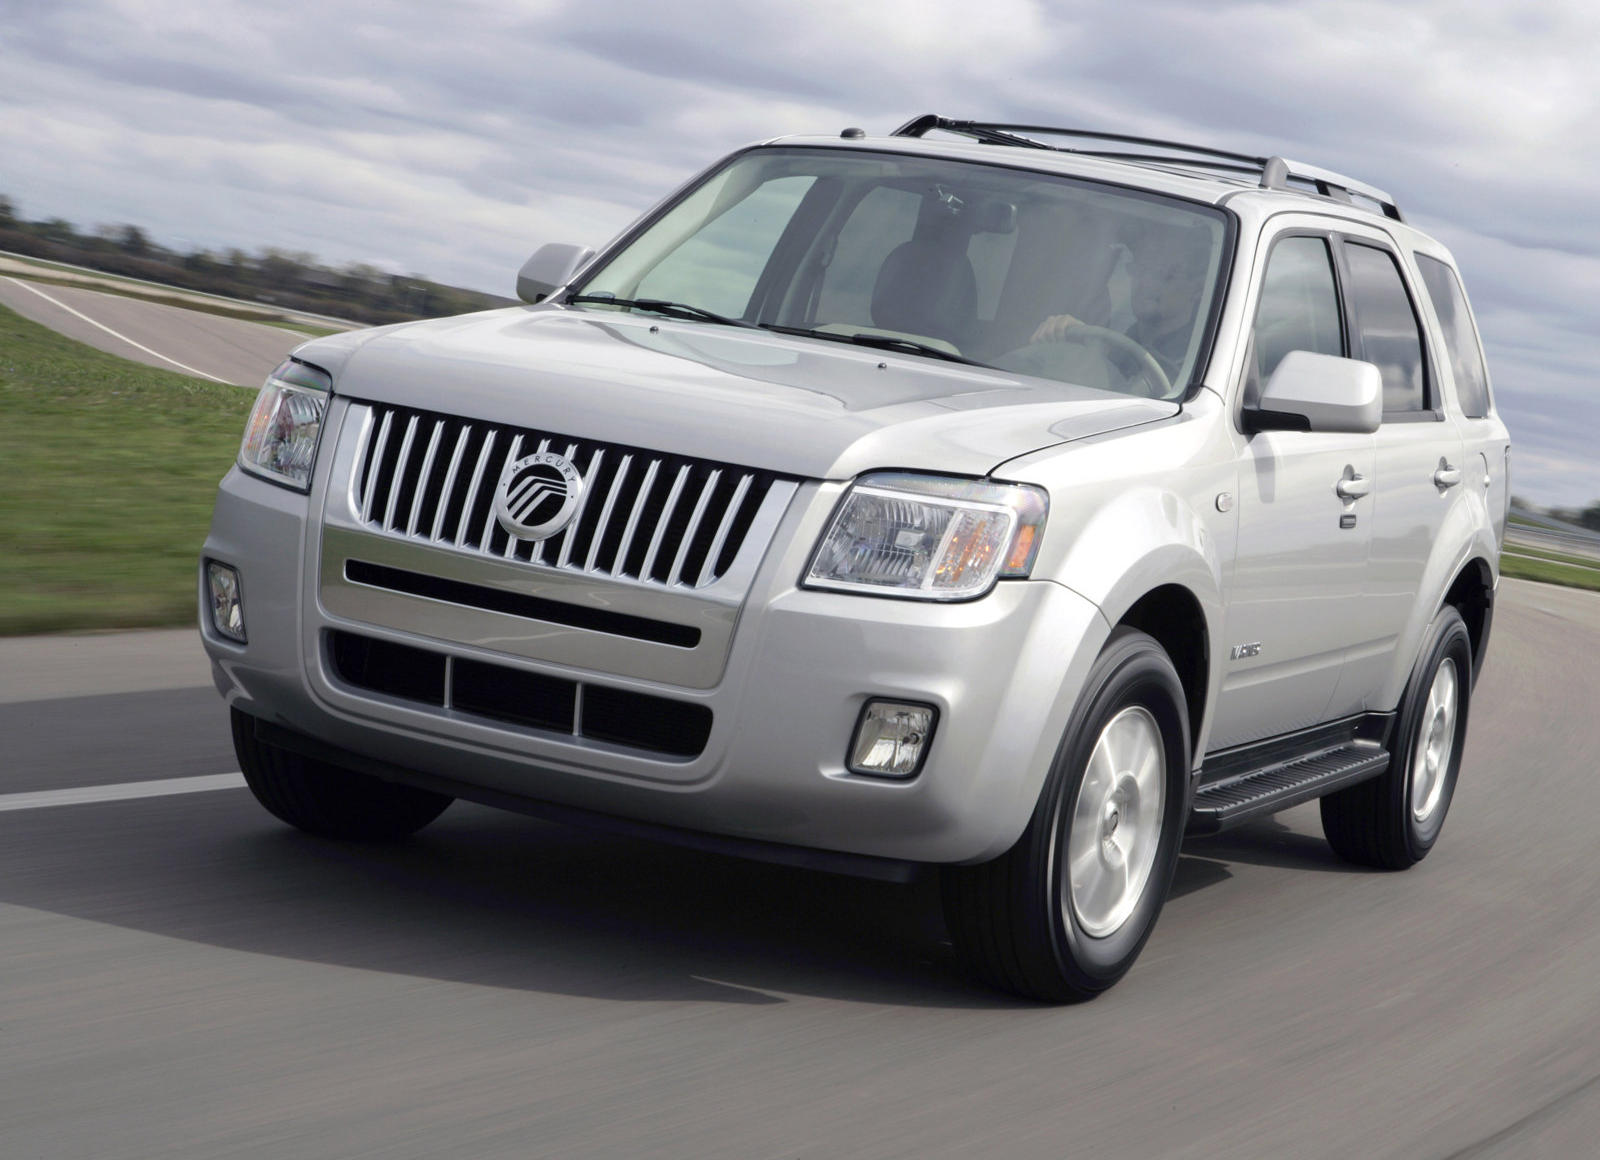 2008 Mercury Mariner Front View Driving